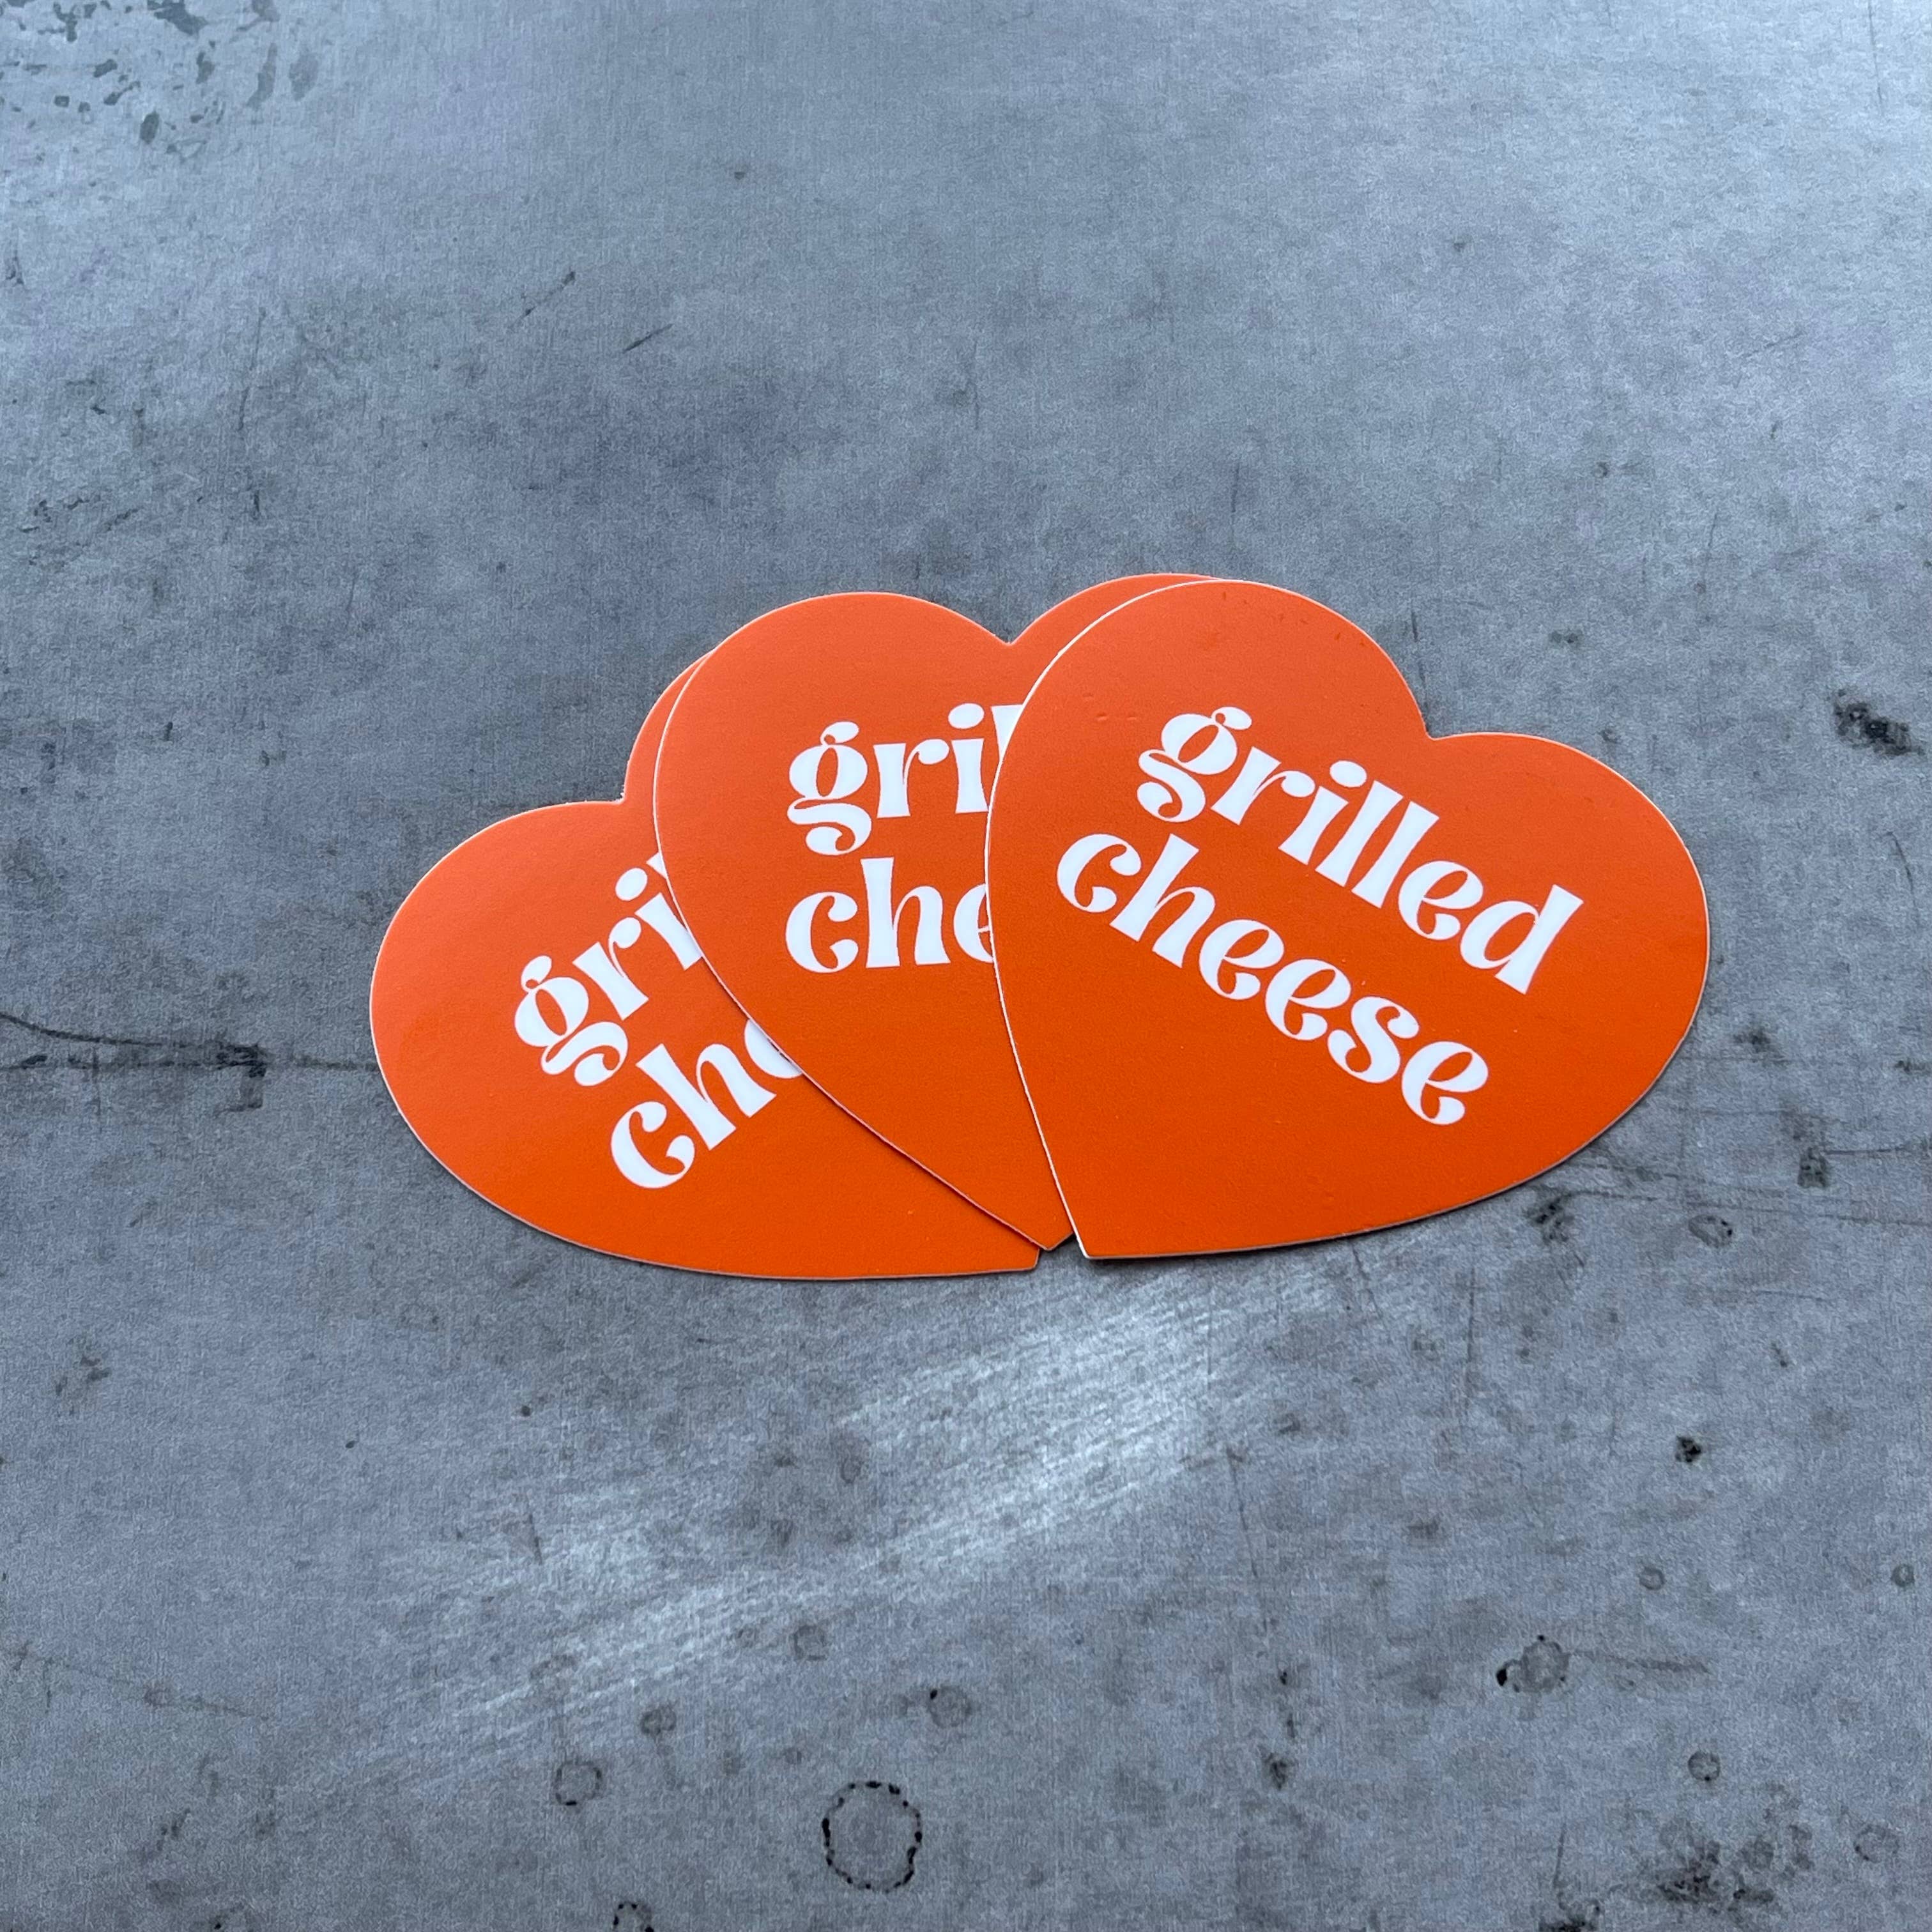 Grilled Cheese Heart Sticker restaurant deli Foodie gifts